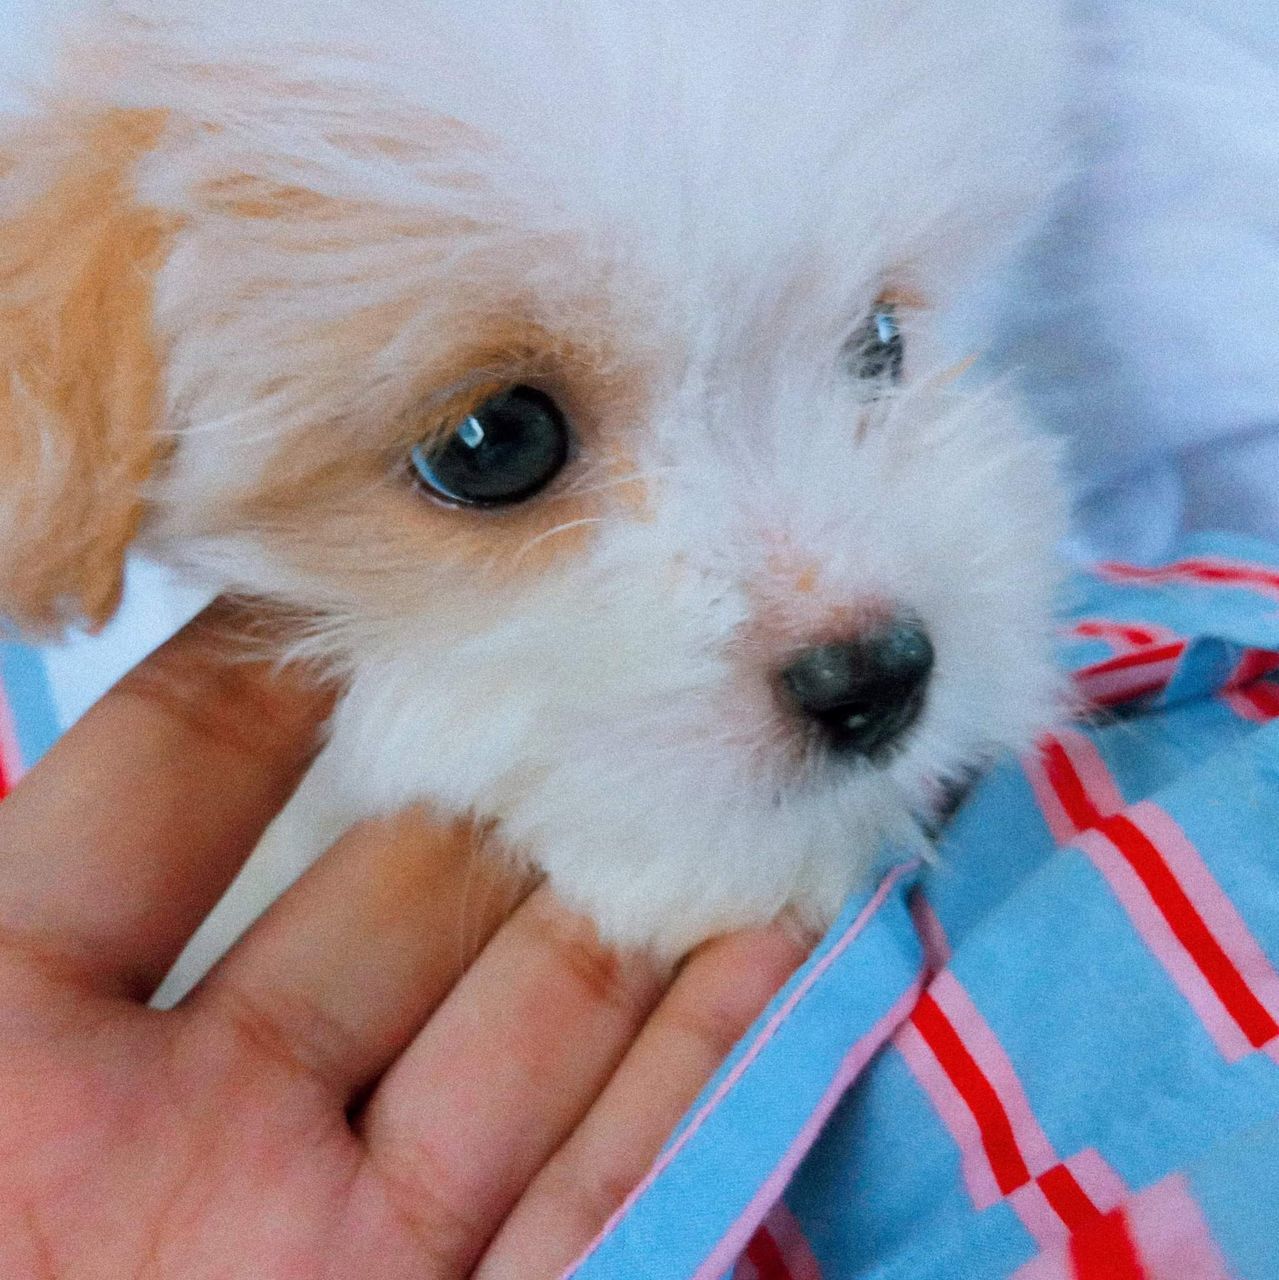 pet, domestic animals, one animal, mammal, dog, animal themes, animal, canine, maltese, puppy, lap dog, morkie, young animal, cute, looking at camera, hand, portrait, carnivore, one person, bichon, cavachon, close-up, pomeranian, holding, animal body part, bolognese